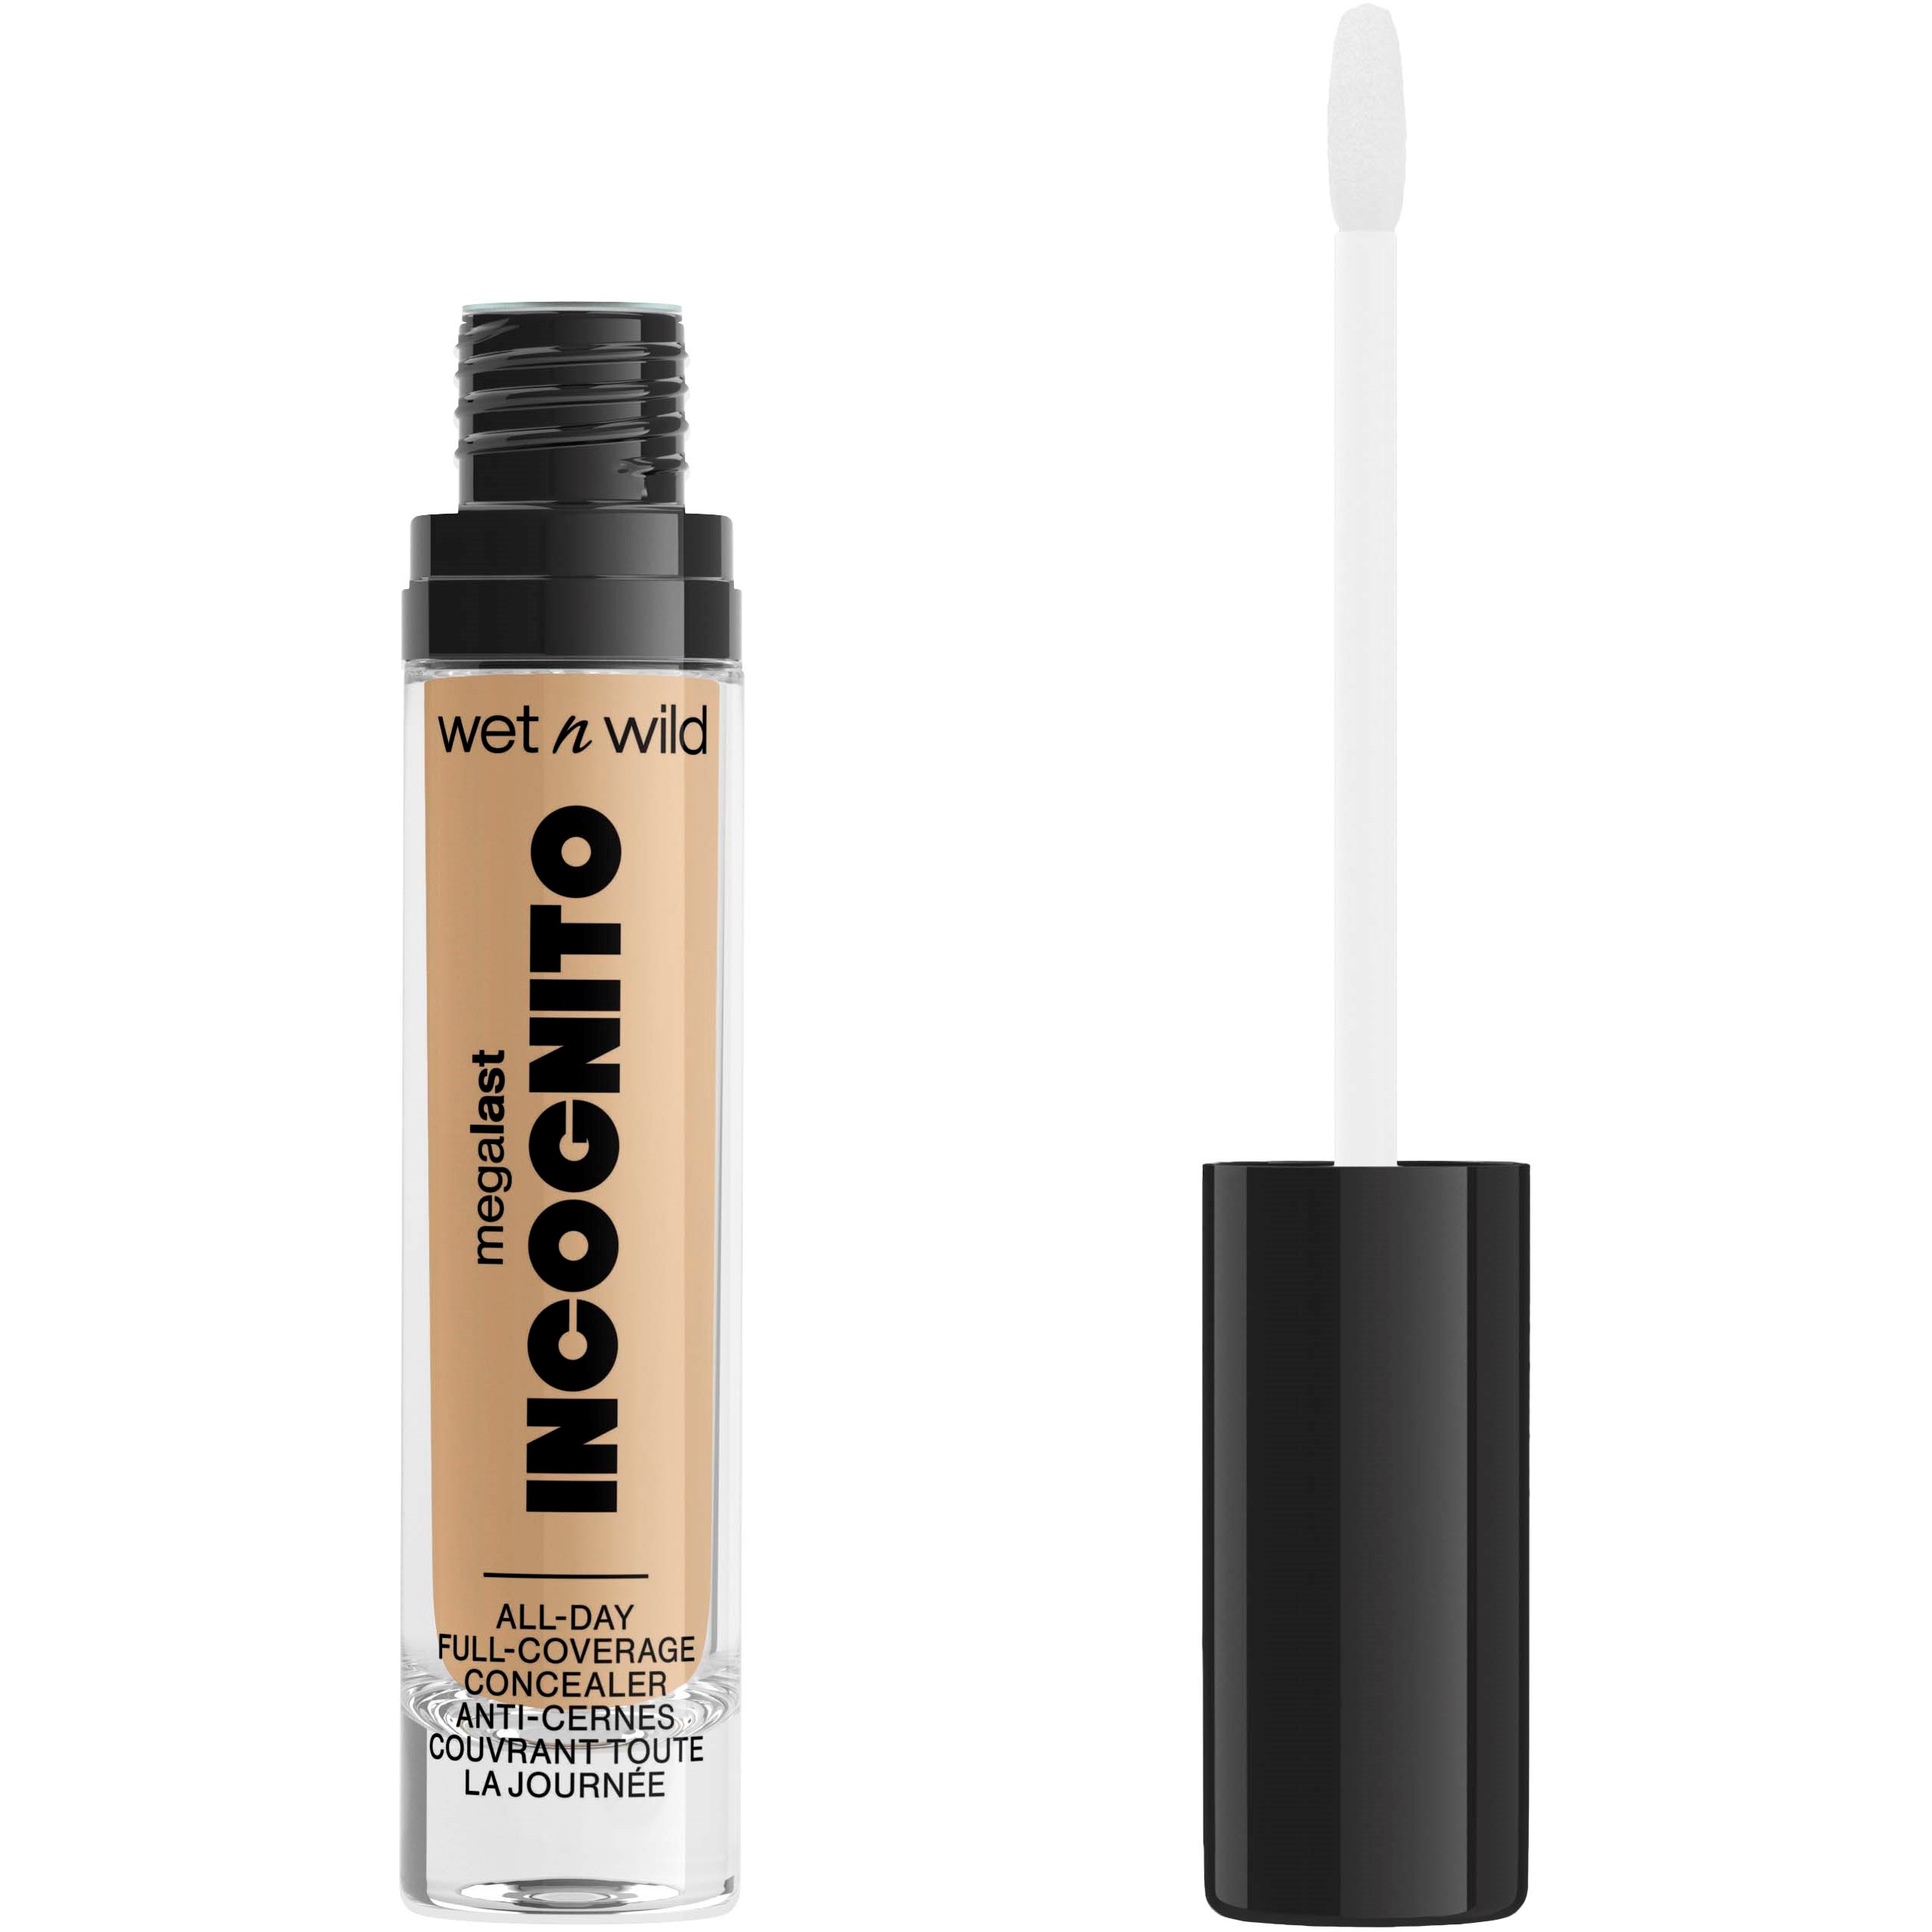 Wet n Wild MegaLast Incognito AllDay Full Coverage Concealer Medium Ho